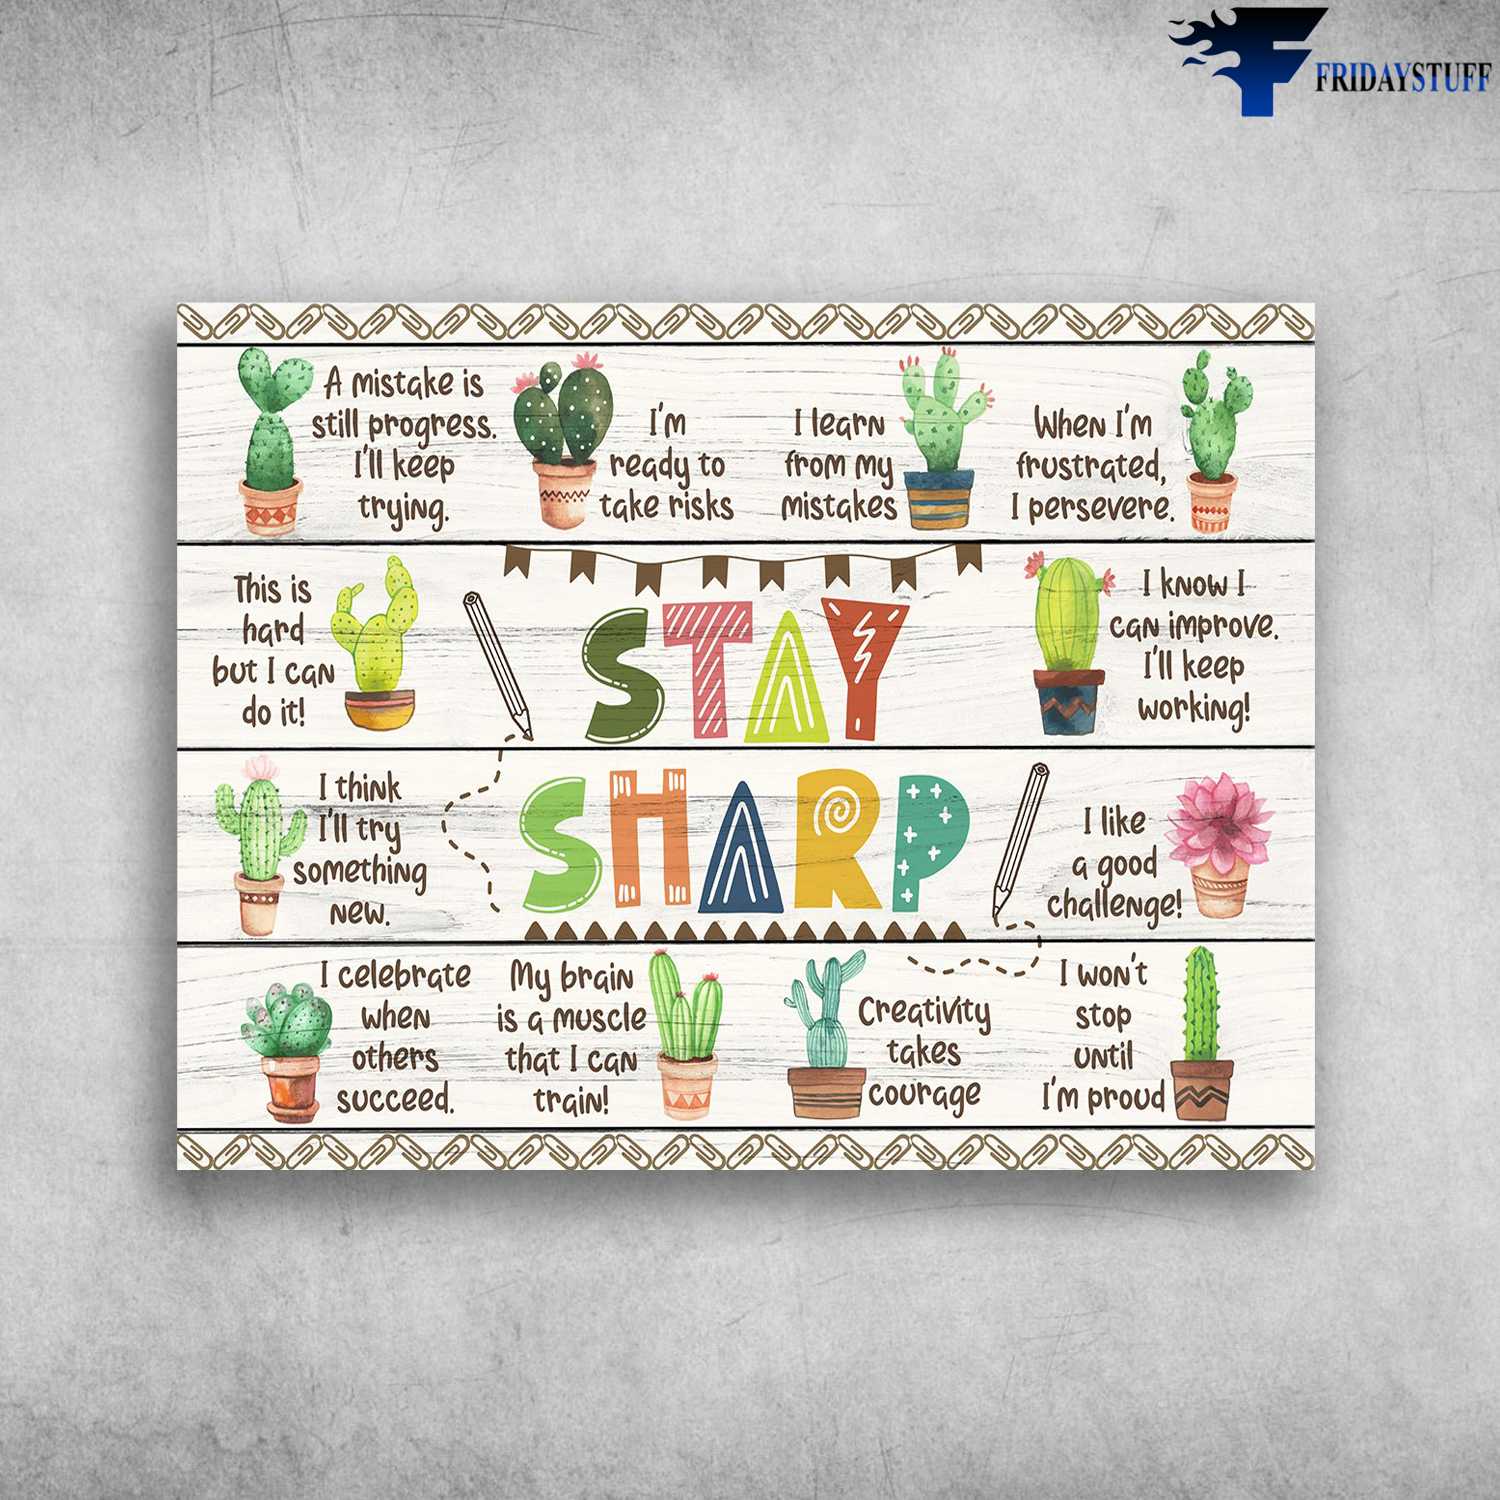 Cactus Lover, Wall Poster - A Mistake Is Still Progress, I'll Keep Trying, I'm Ready To Take Risks, I Learn From My Mistakes, When I'm Frustrated, I Persevere